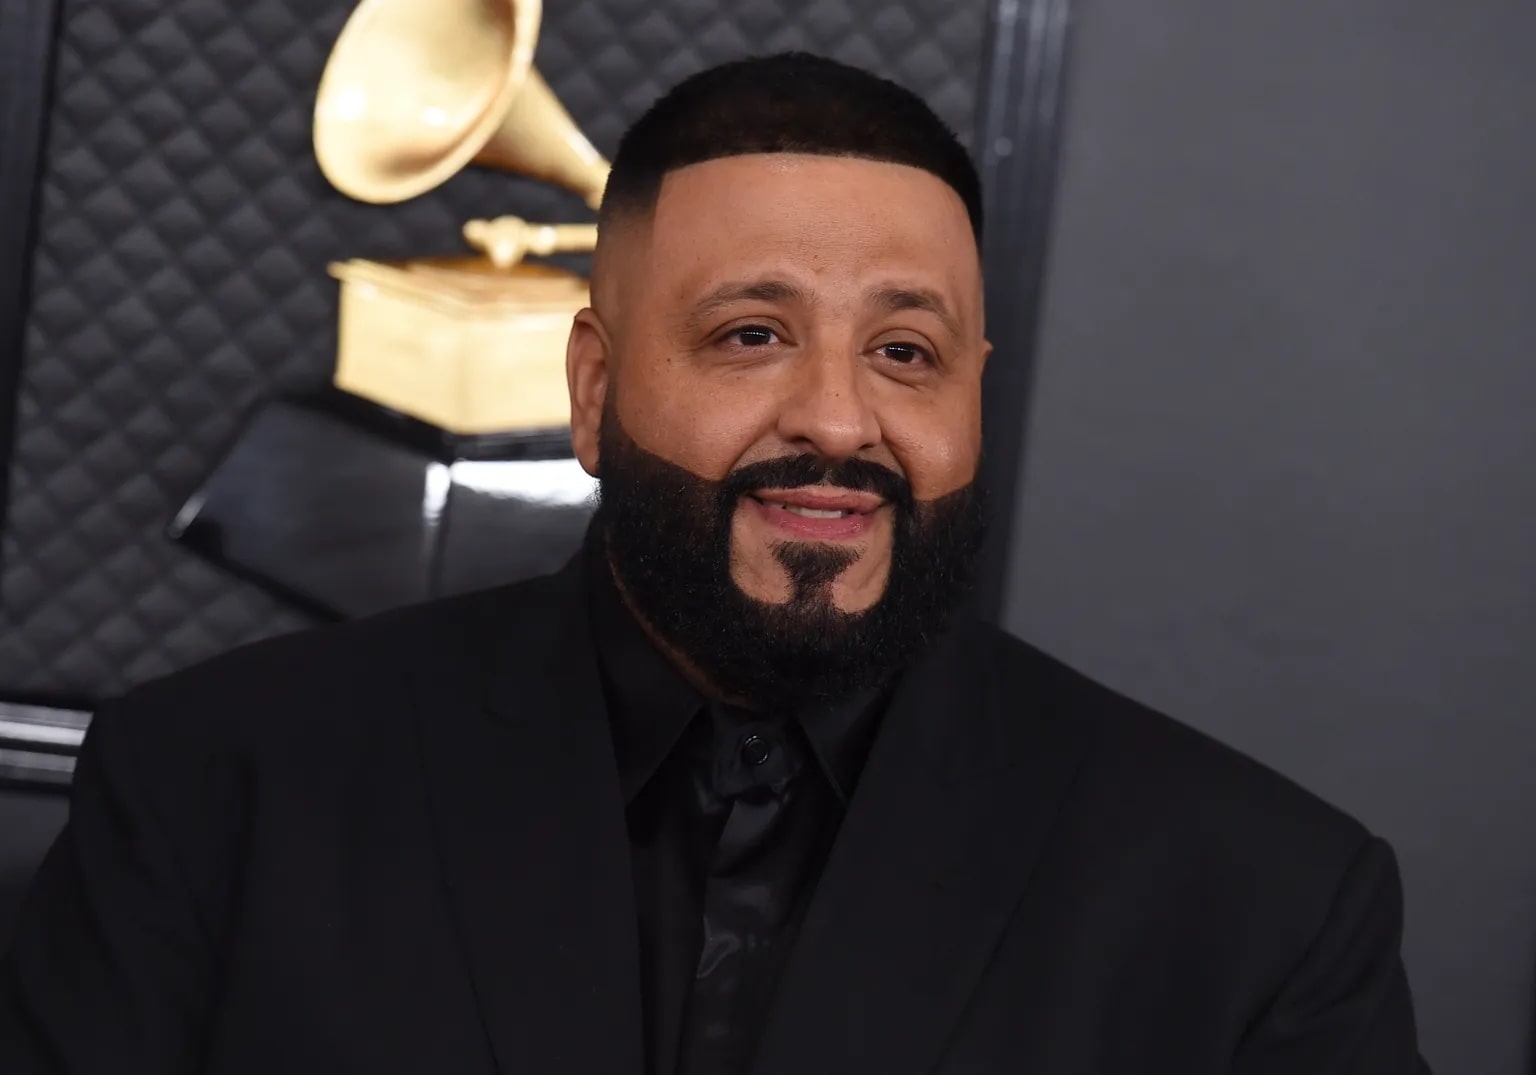 DJ Khaled for Song of the Year?